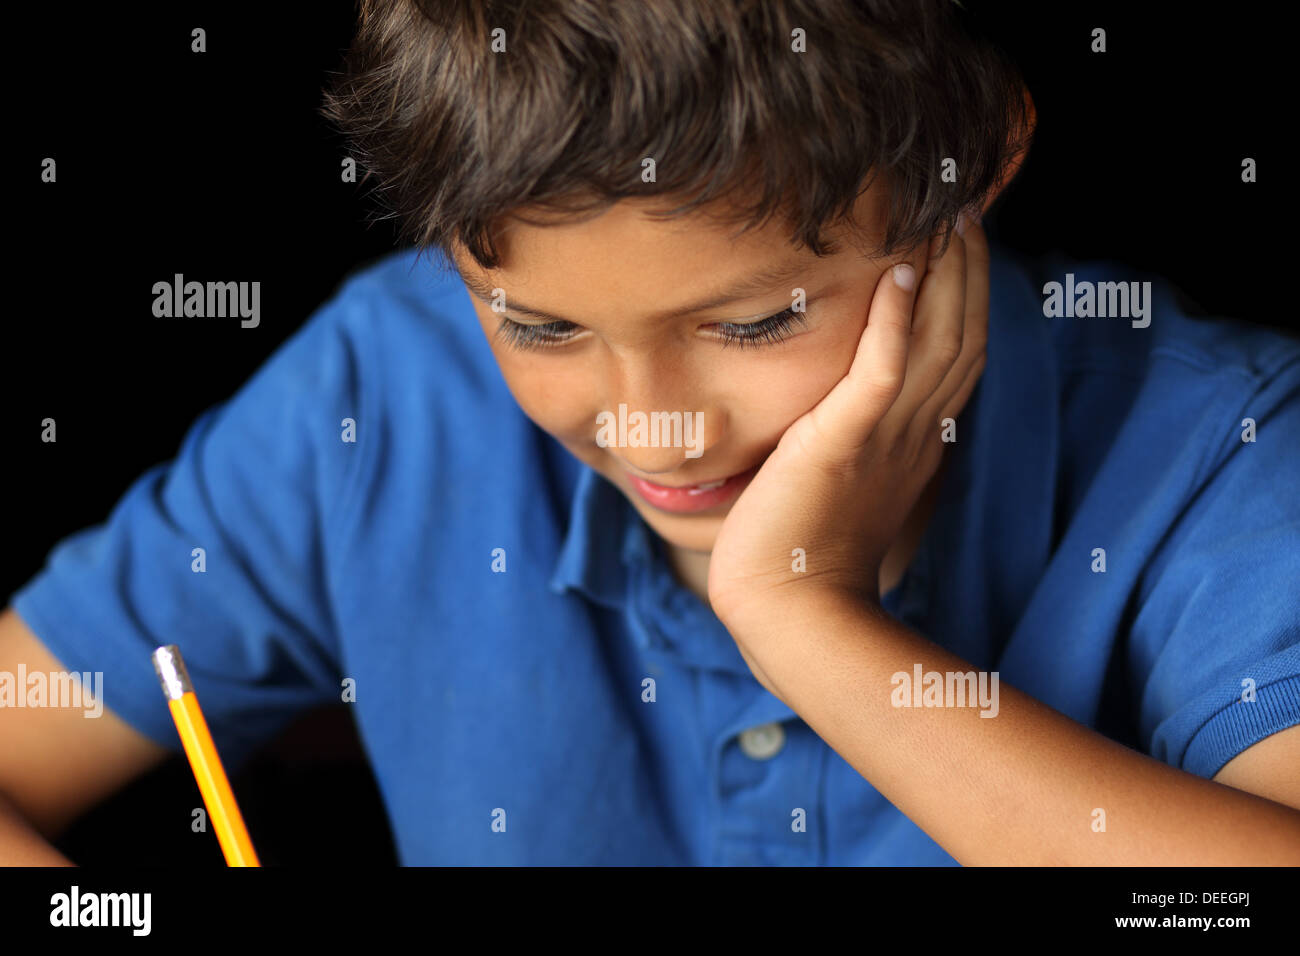 Portrait of young school boy with chiaroscuro lighting - shallow depth of field Stock Photo